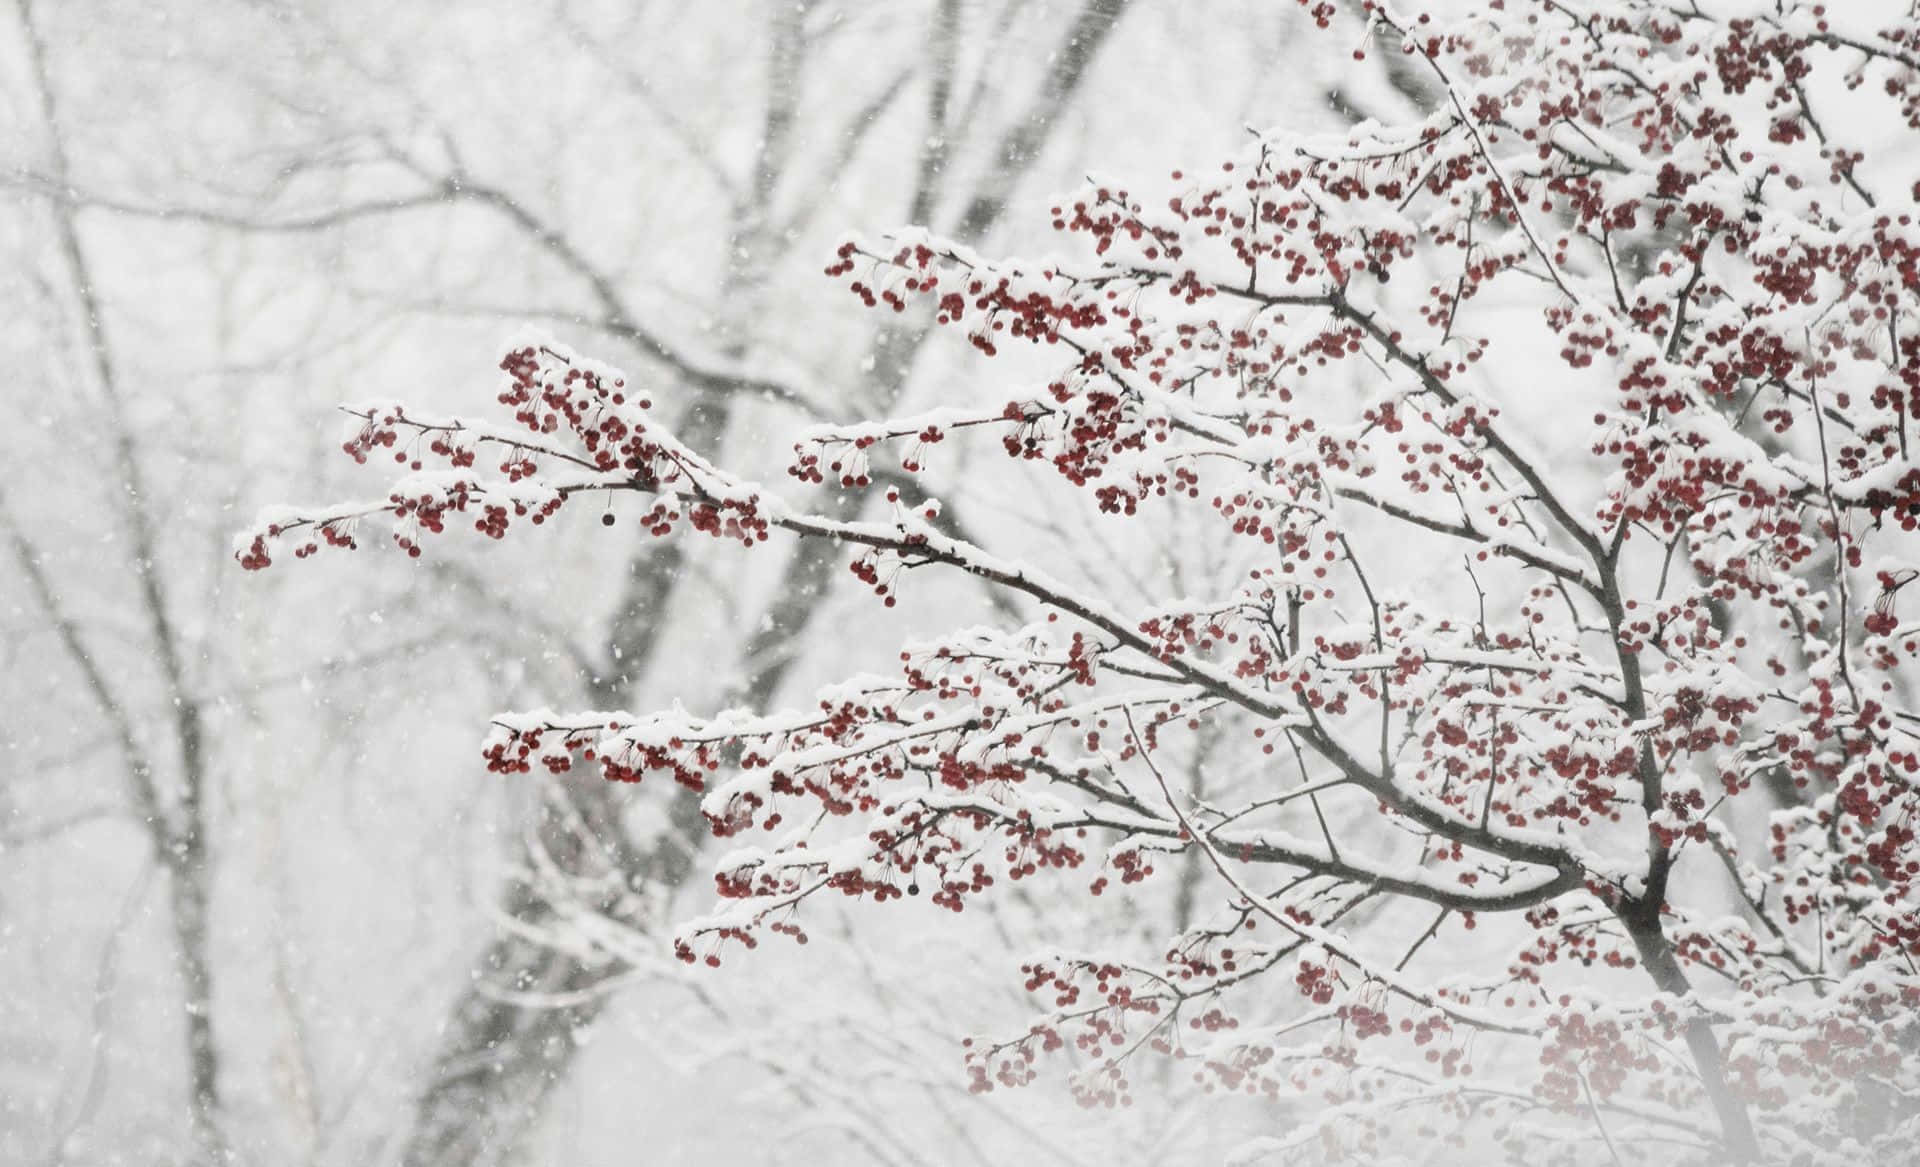 Frost-covered Winter Berries Brighten a Snowy Landscape Wallpaper